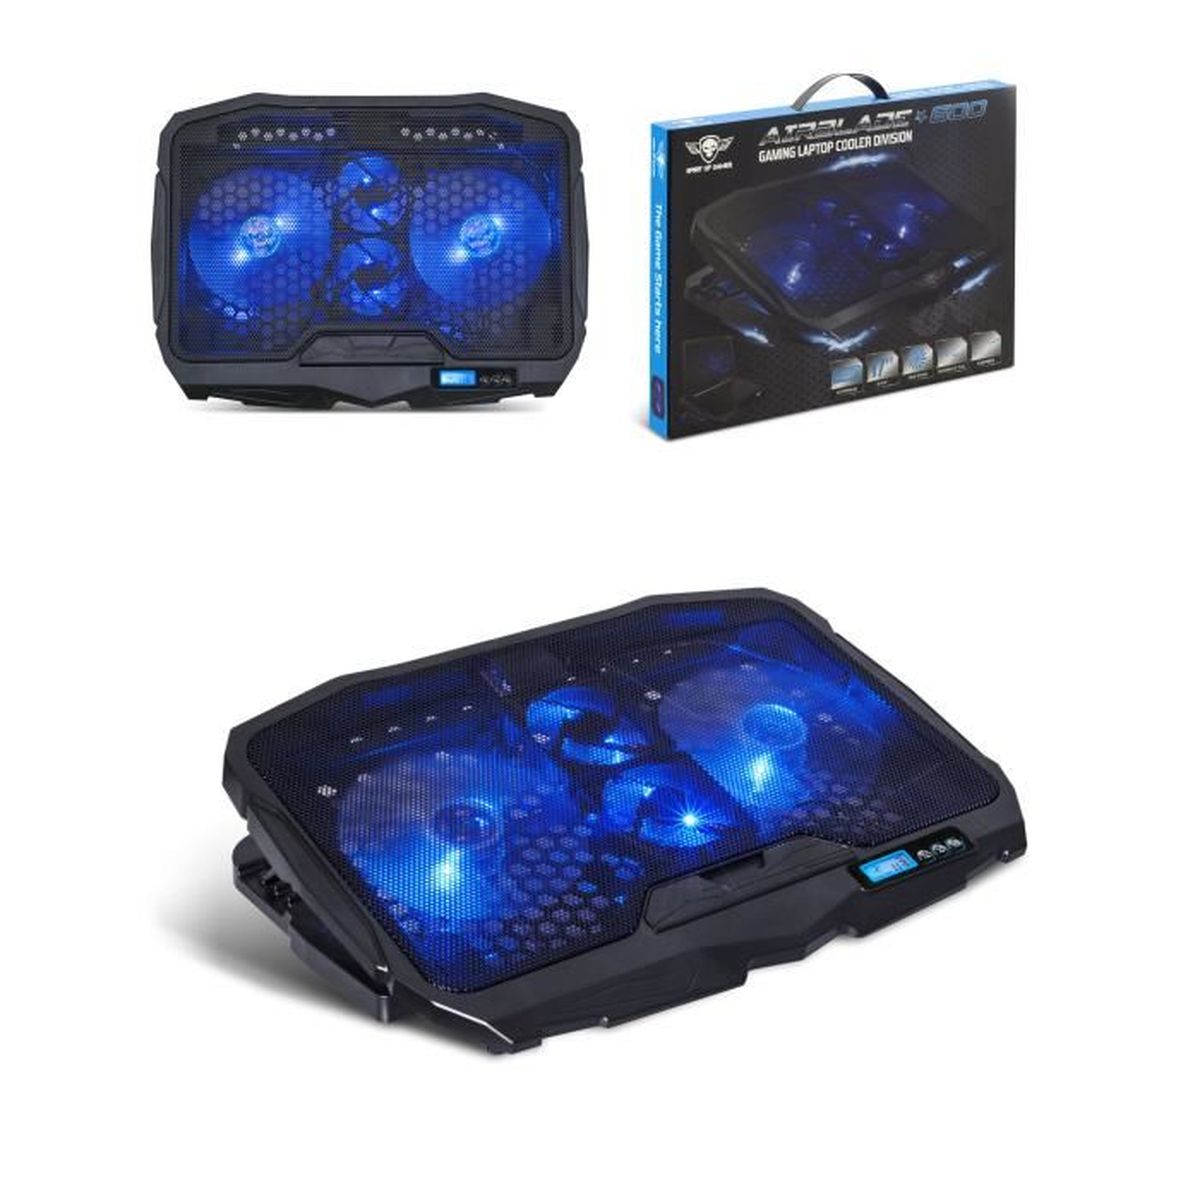 Pc portable geforce reconditionne - Cdiscount